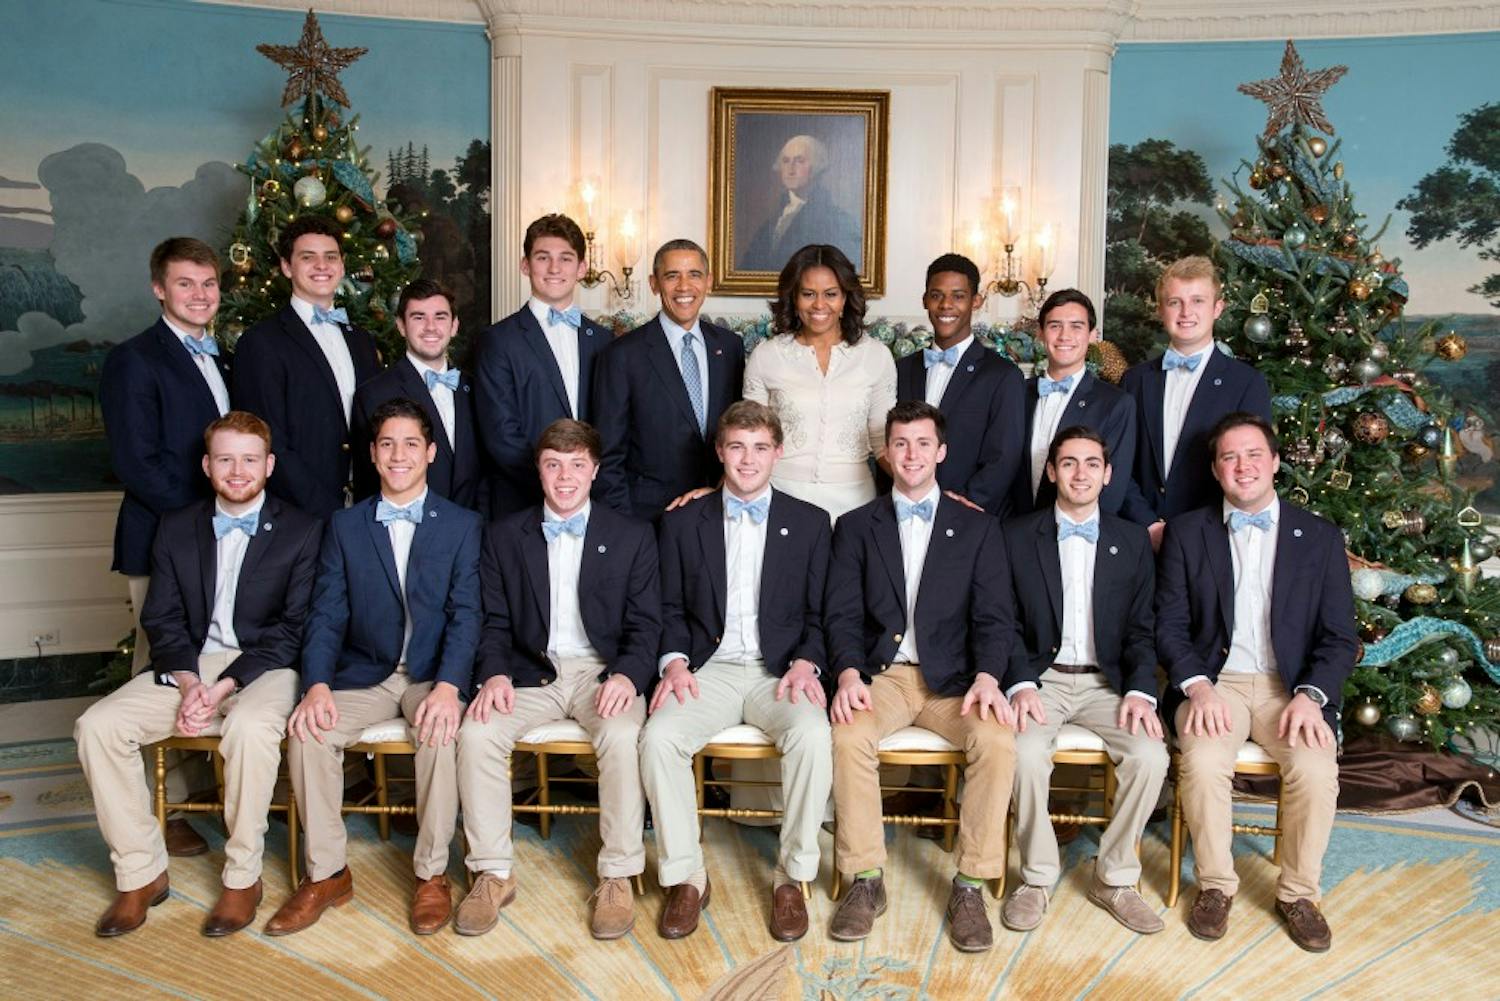 President Barack Obama and First Lady Michelle Obama join the UNC (University of North Carolina) Clef Hangers for a group photo and listen to them perform in the Diplomatic Reception Room prior to Christmas holiday EOP Reception #1 at the White House, Dec. 15, 2015. (Official White House Photo by Chuck Kennedy)This photograph is provided by THE WHITE HOUSE as a courtesy and may be printed by the subject(s) in the photograph for personal use only. The photograph may not be manipulated in any way and may not otherwise be reproduced, disseminated or broadcast, without the written permission of the White House Photo Office. This photograph may not be used in any commercial or political materials, advertisements, emails, products, promotions that in any way suggests approval or endorsement of the President, the First Family, or the White House.